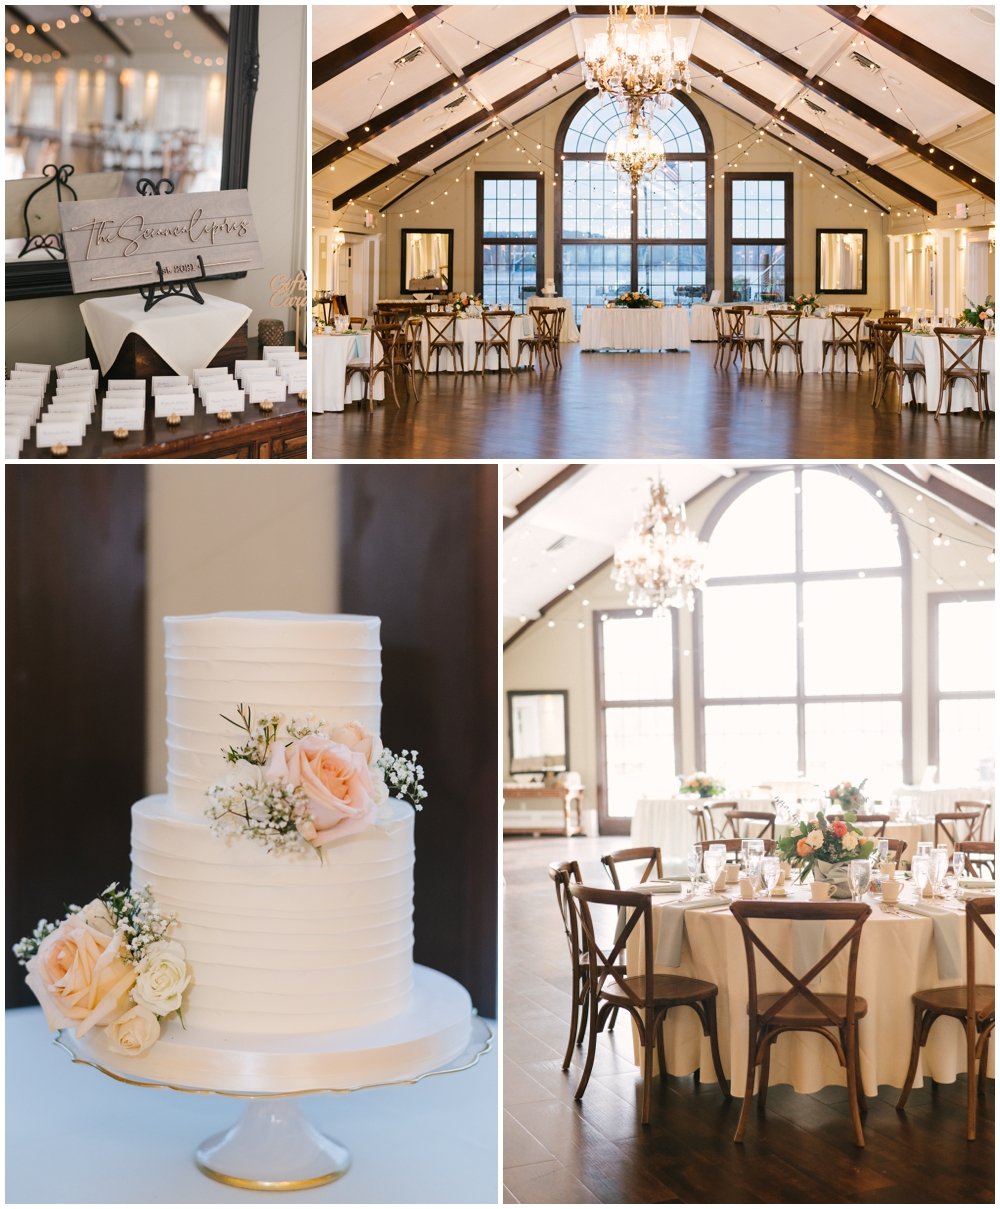 Reception details at Lake Mohawk Country Club Wedding | NKB Photo